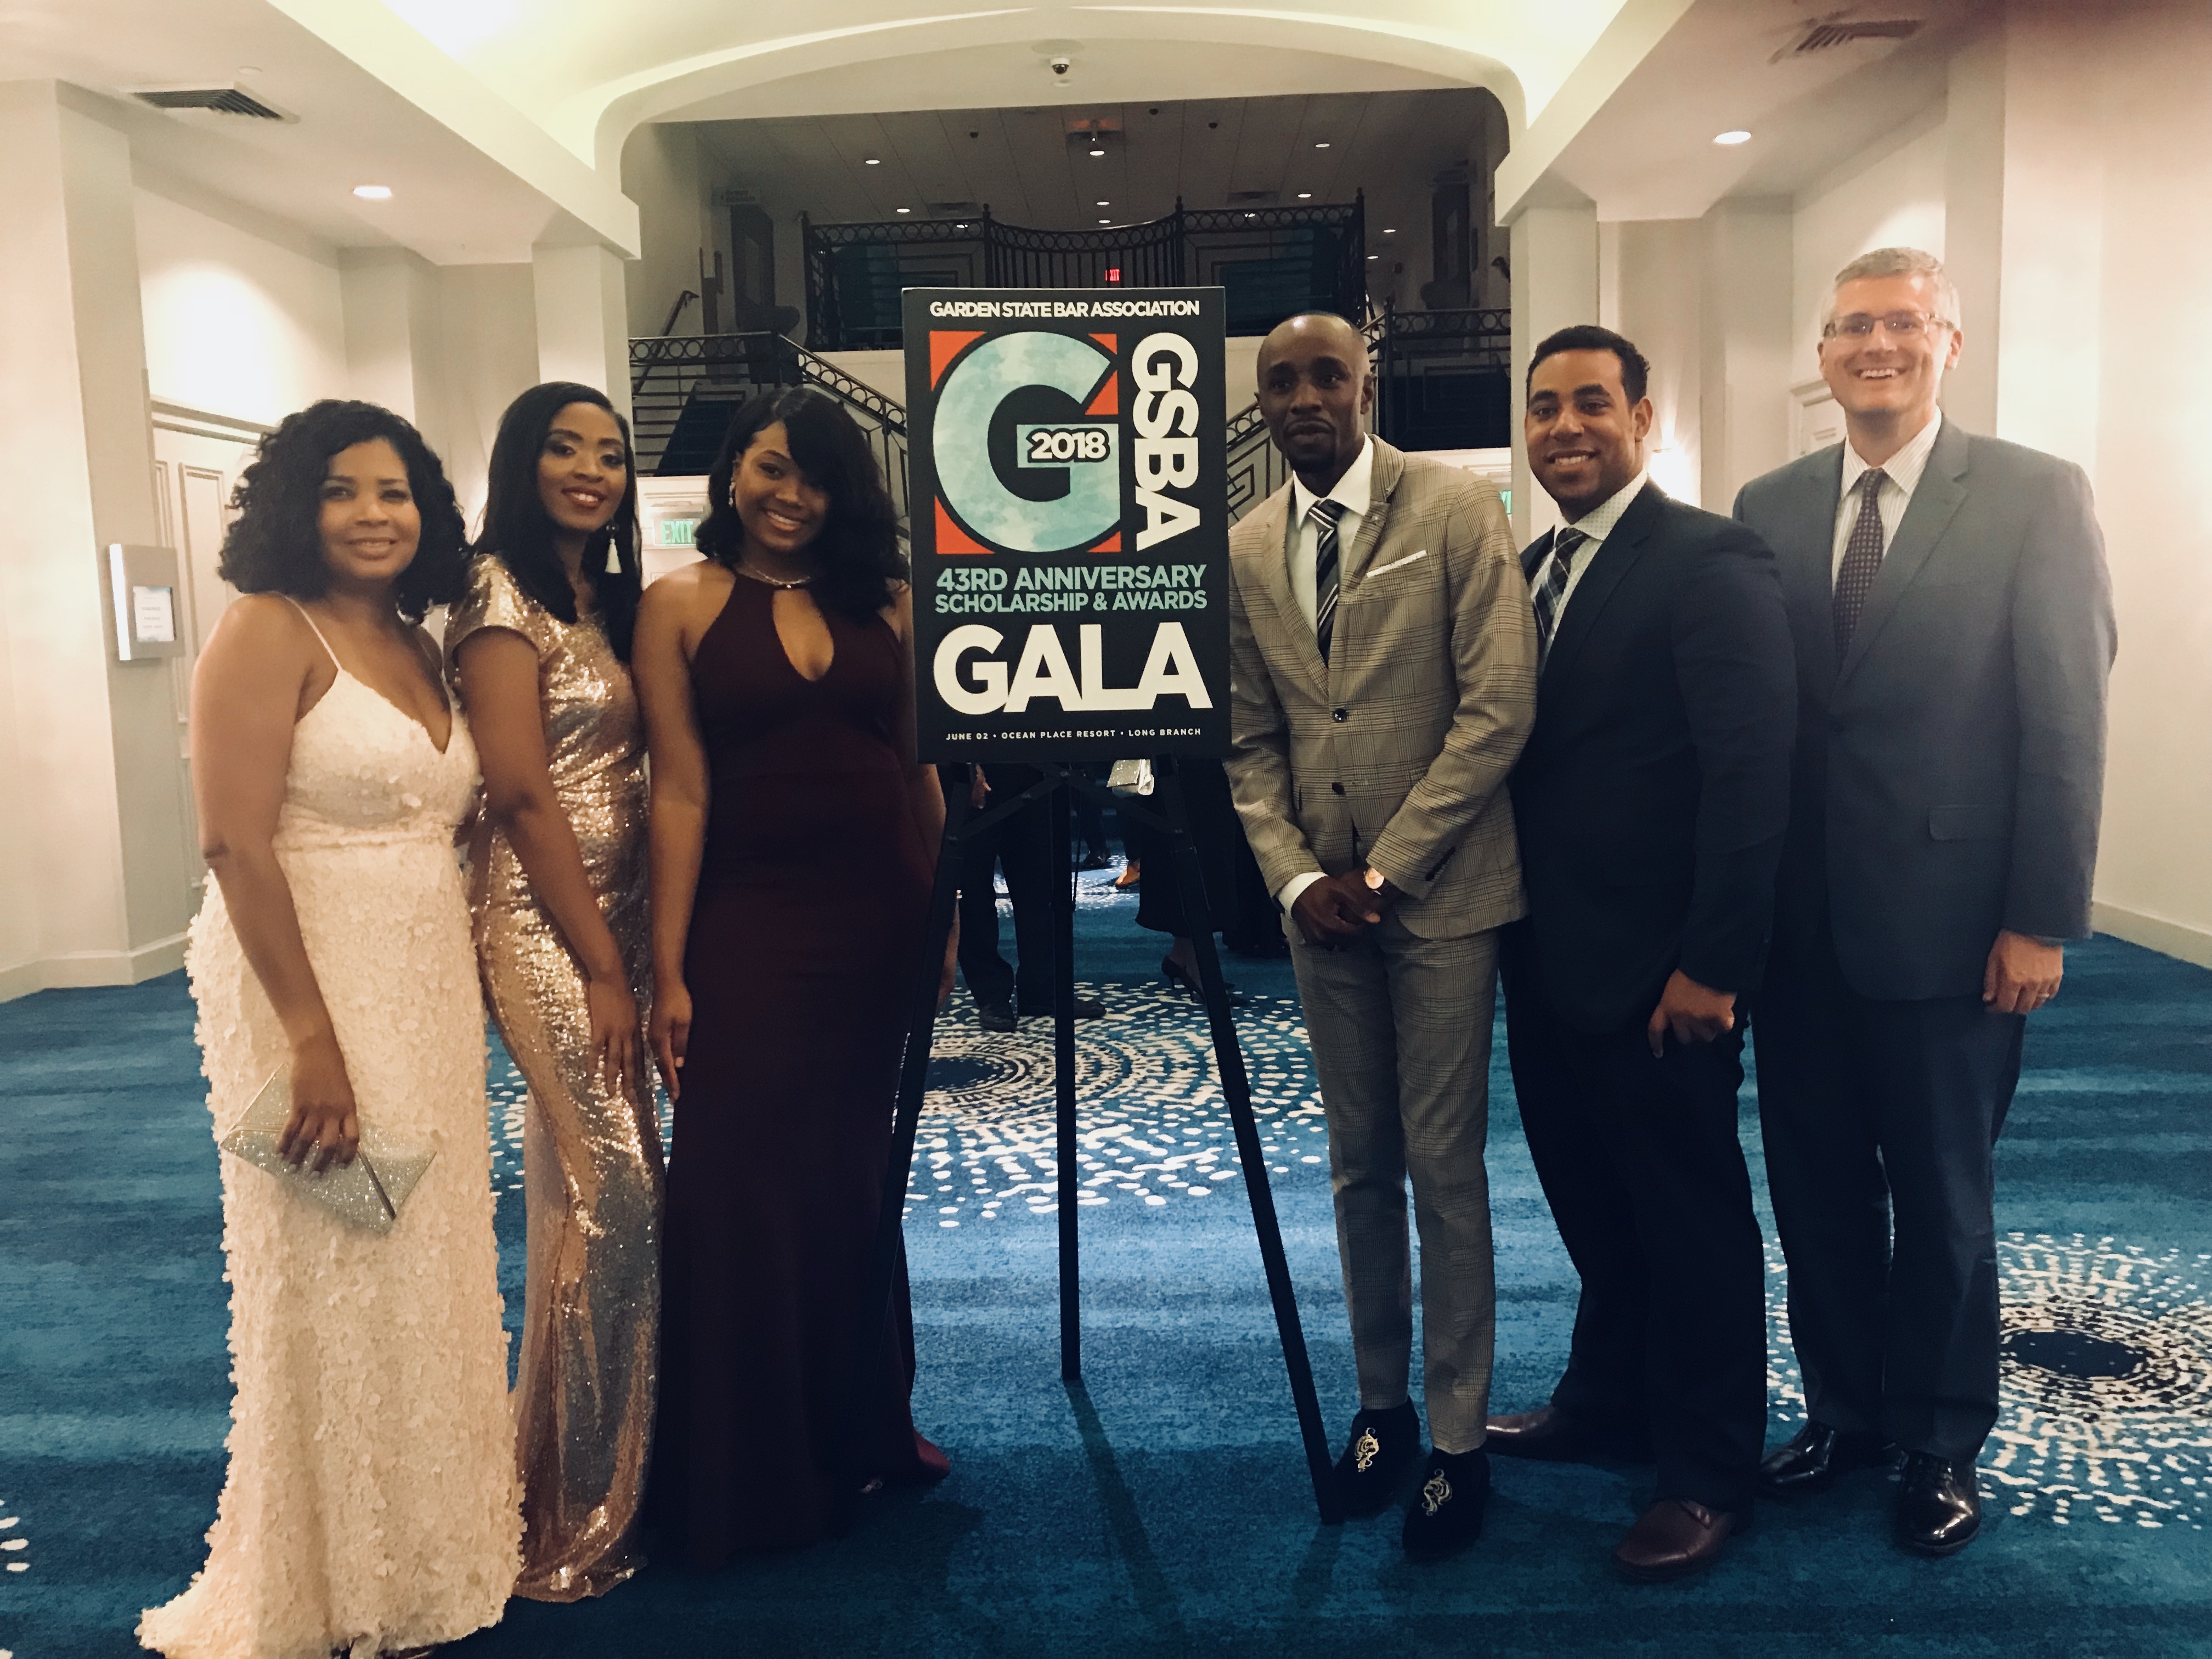 Students with Co-Dean Cahill at the GBSA Gala.